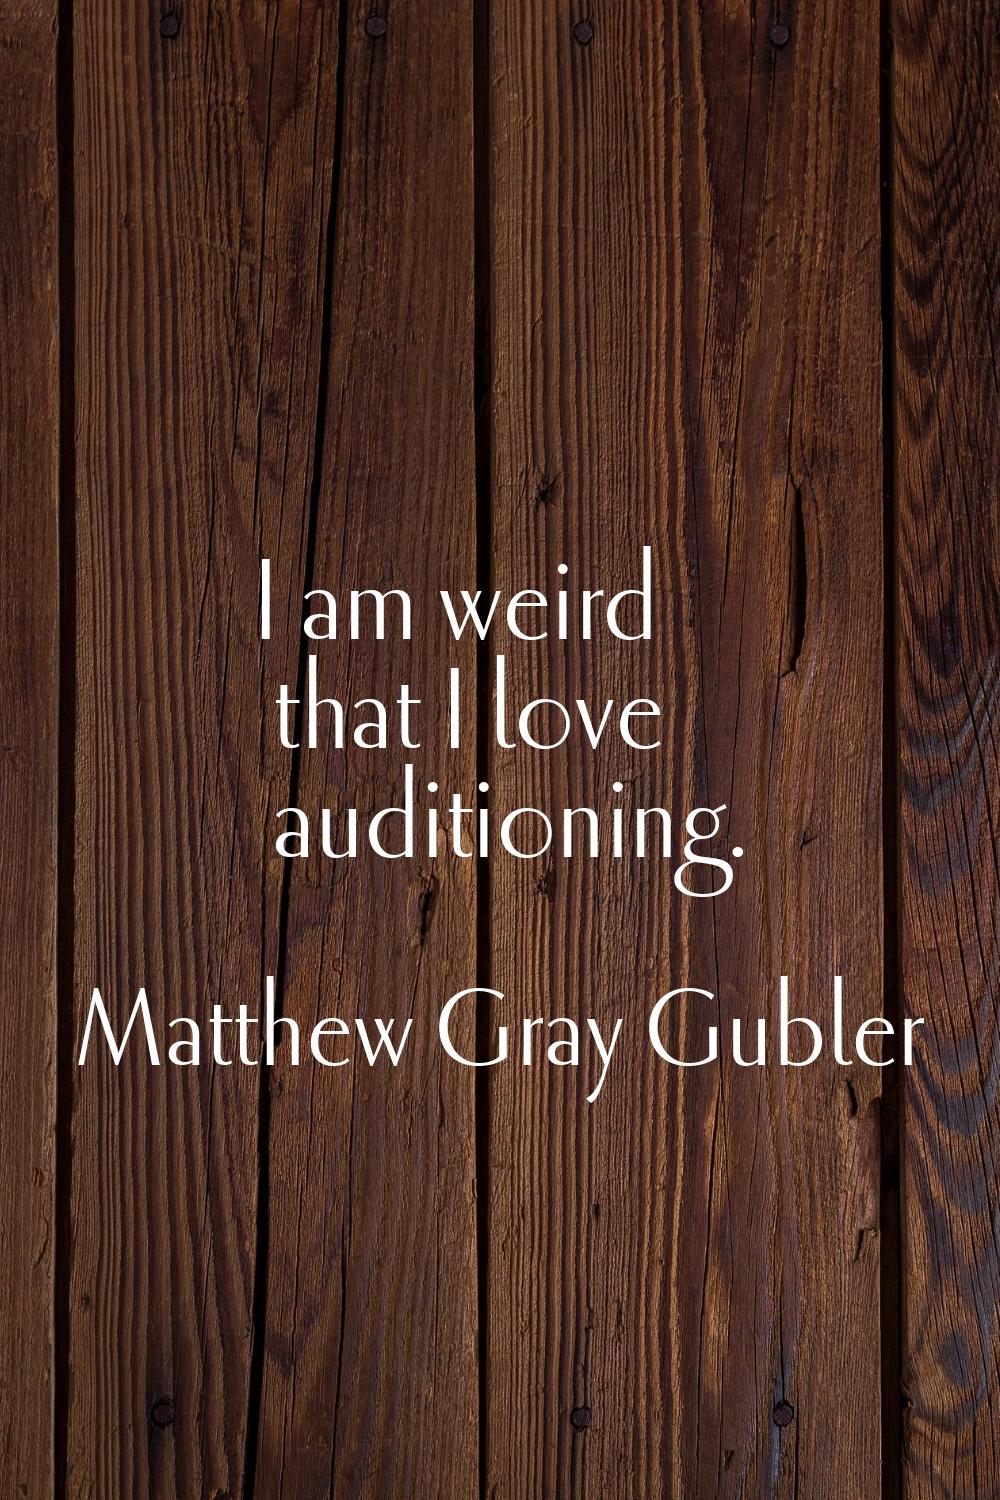 I am weird that I love auditioning.